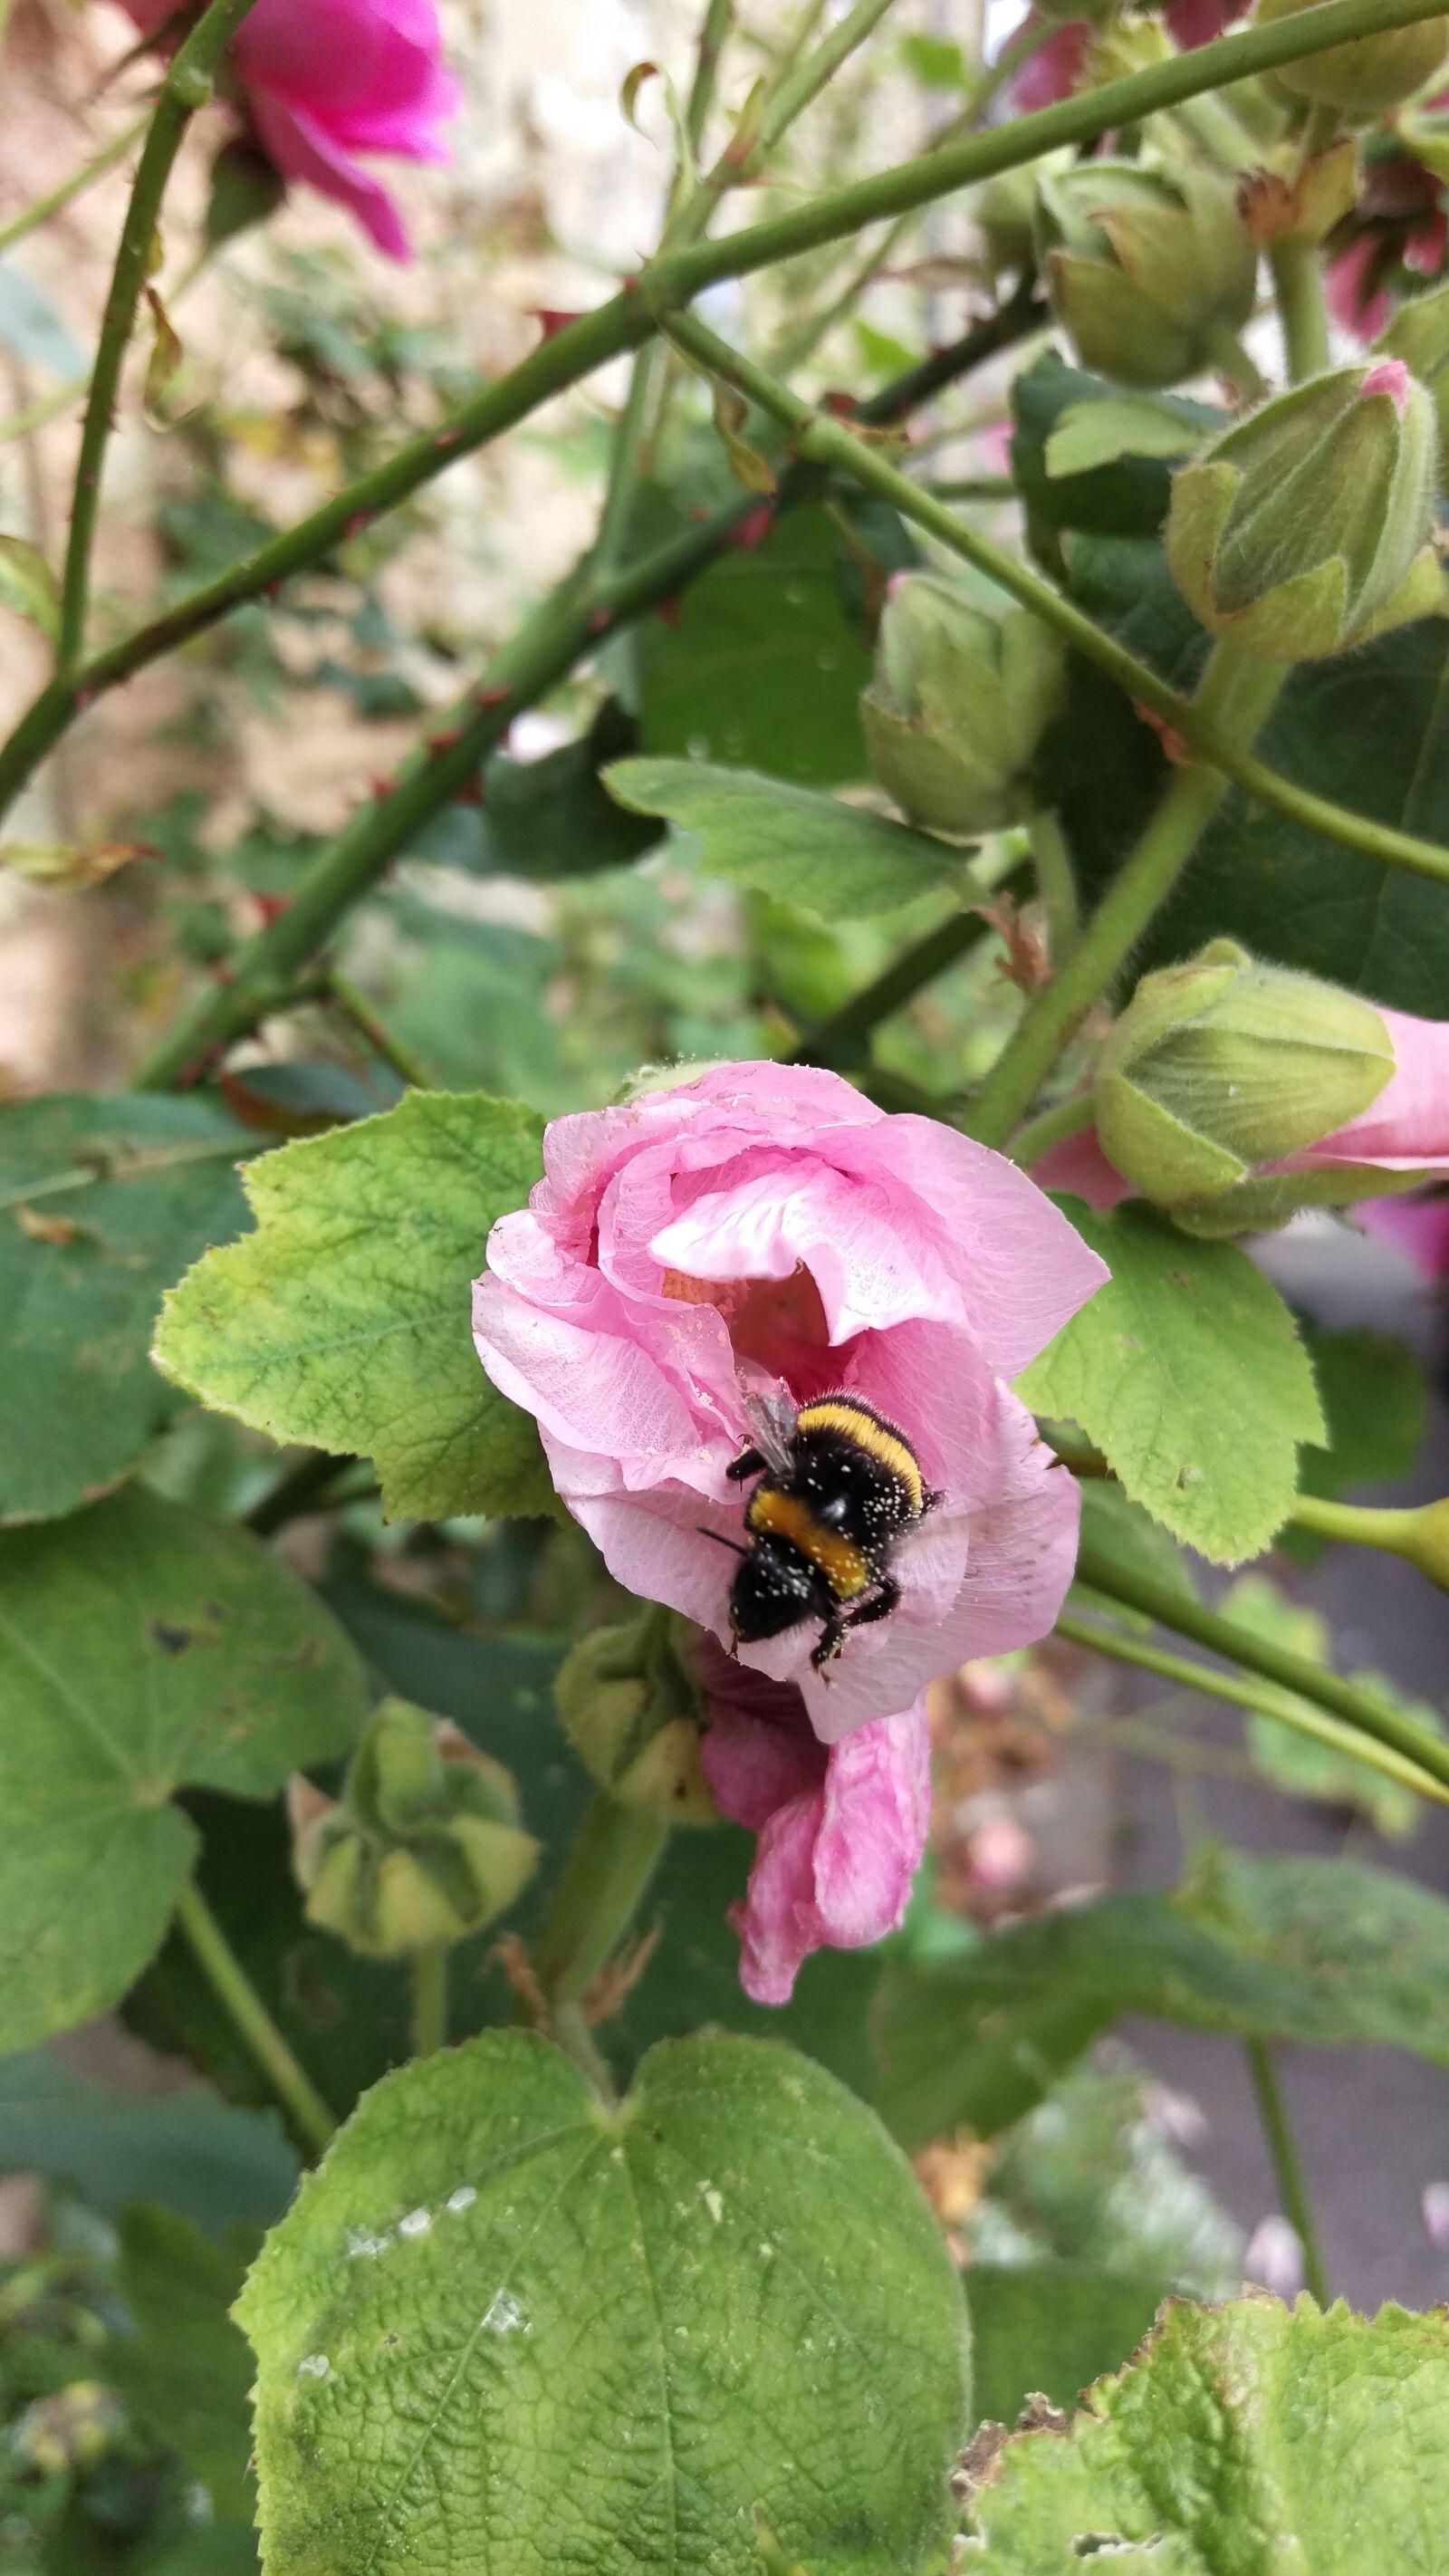 HTC ONE M9 sample photo. Hollyhock, flower, bumblebee photography